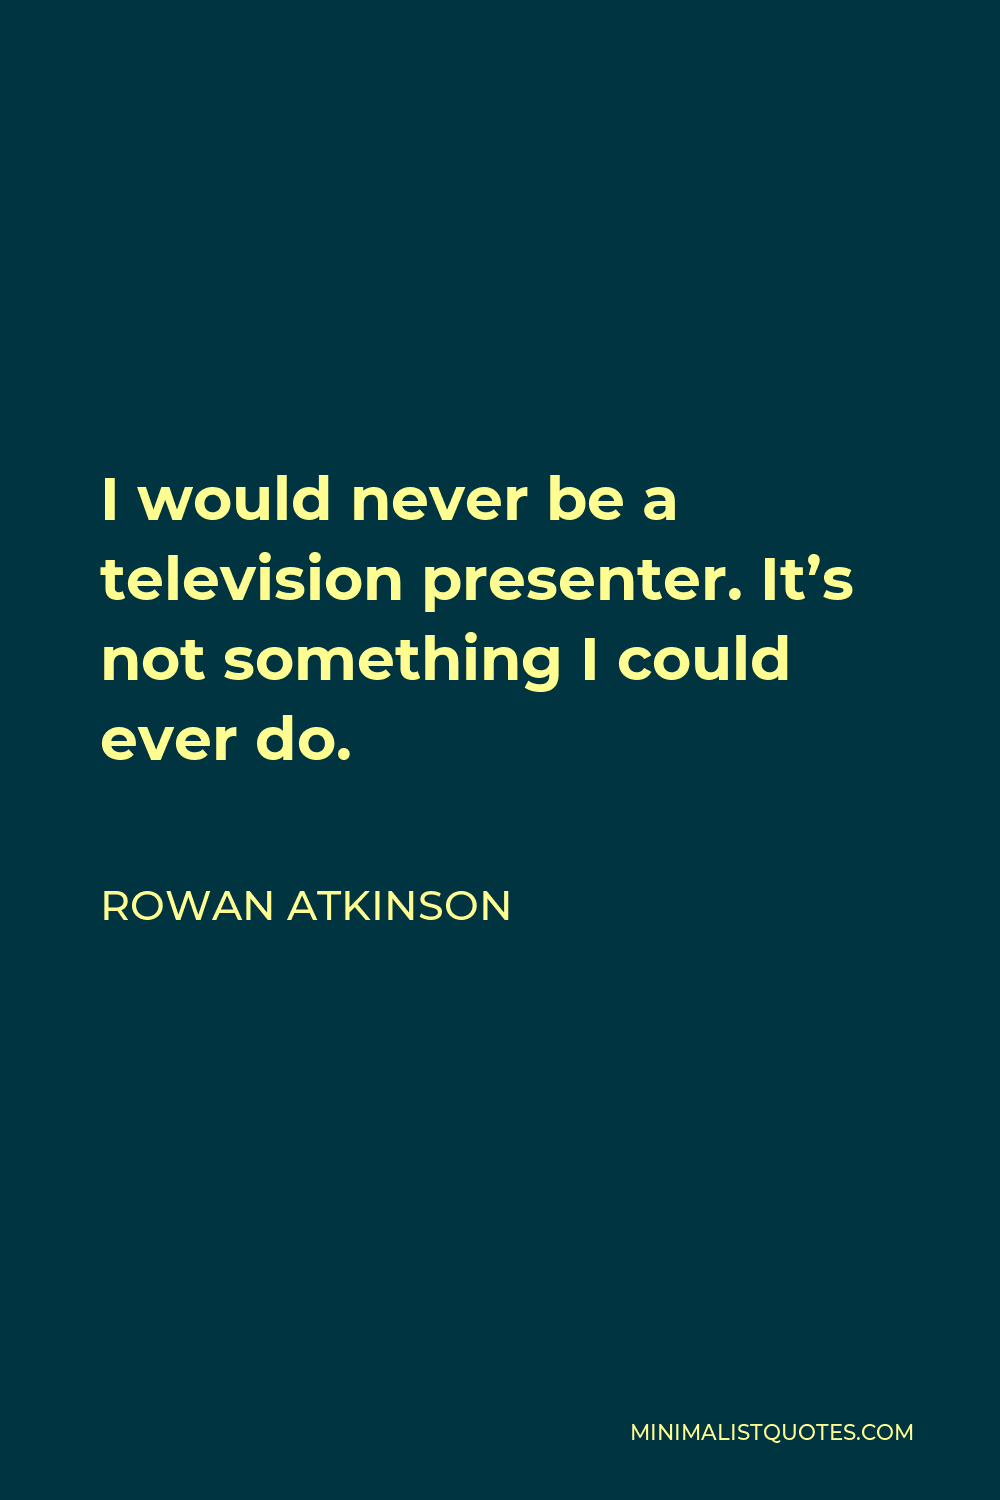 Rowan Atkinson Quote - I would never be a television presenter. It’s not something I could ever do.